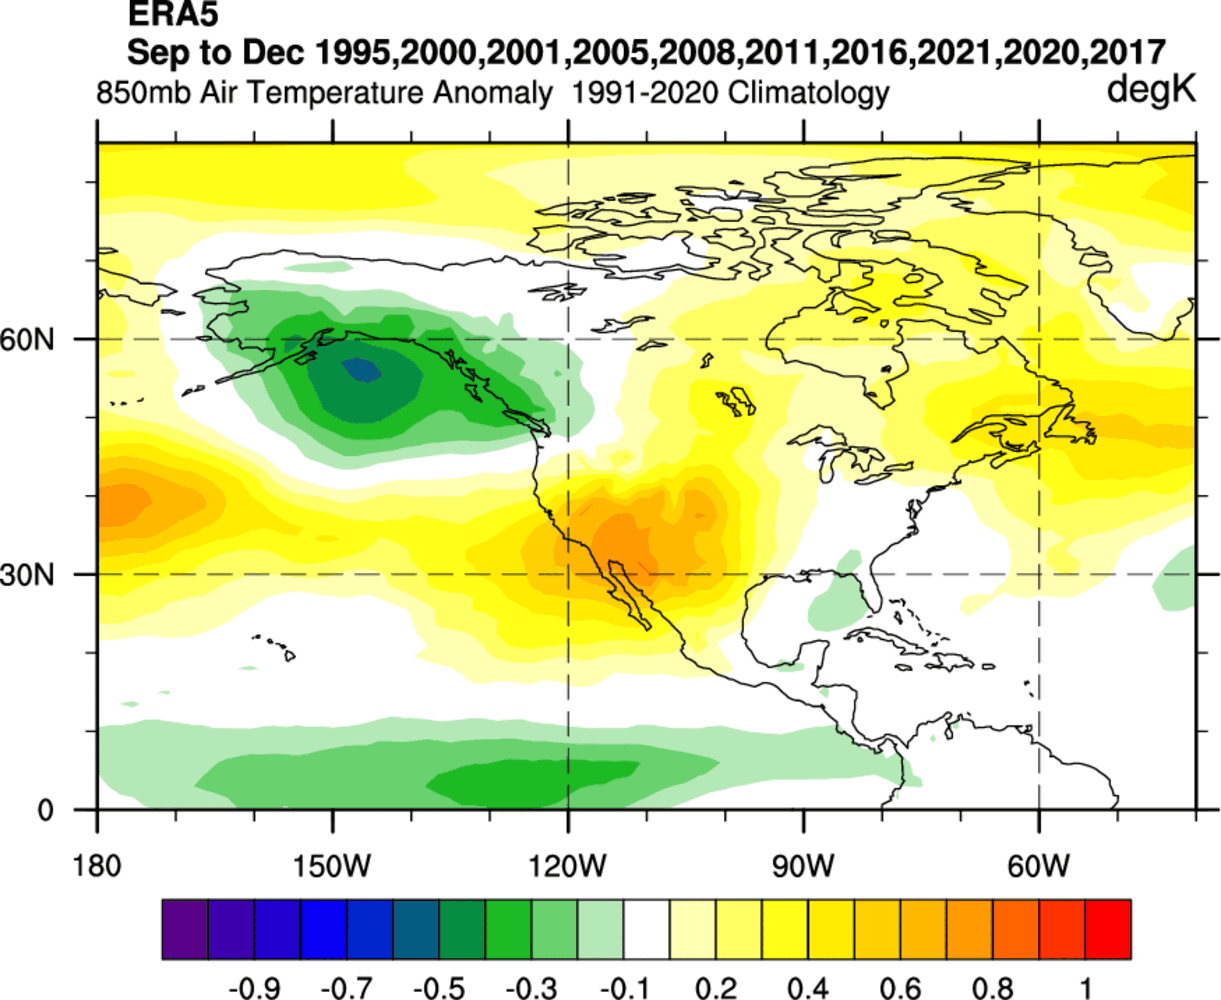 fall-forecast-update-2022-la-nina-enso-historical-temperature-anomaly-weather-pattern-united-states-canada